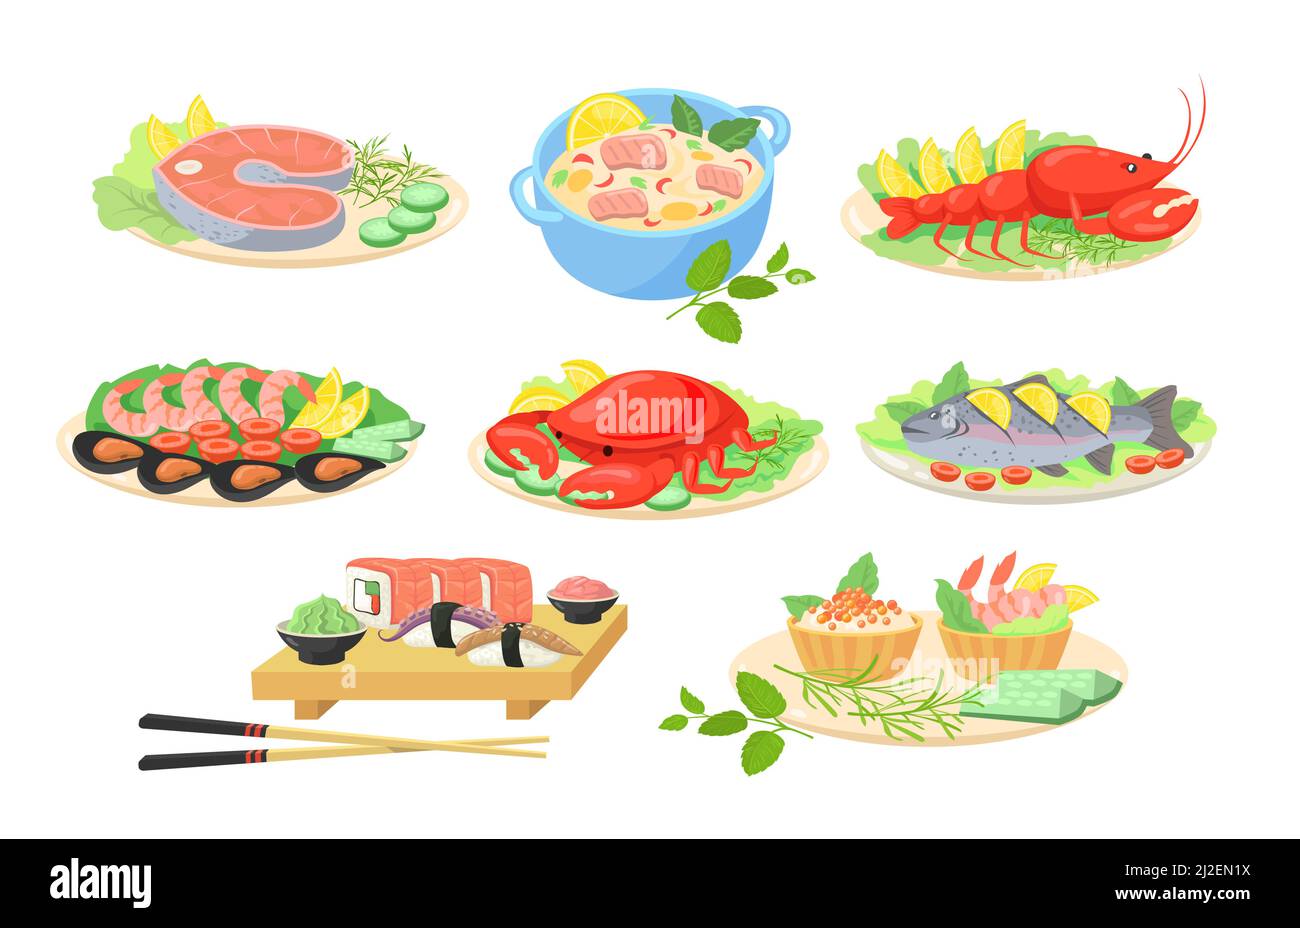 Creative festive seafood dishes flat pictures set for web design. Cartoon fish, shrimps, salmon, crab and lobster served on plates isolated vector ill Stock Vector